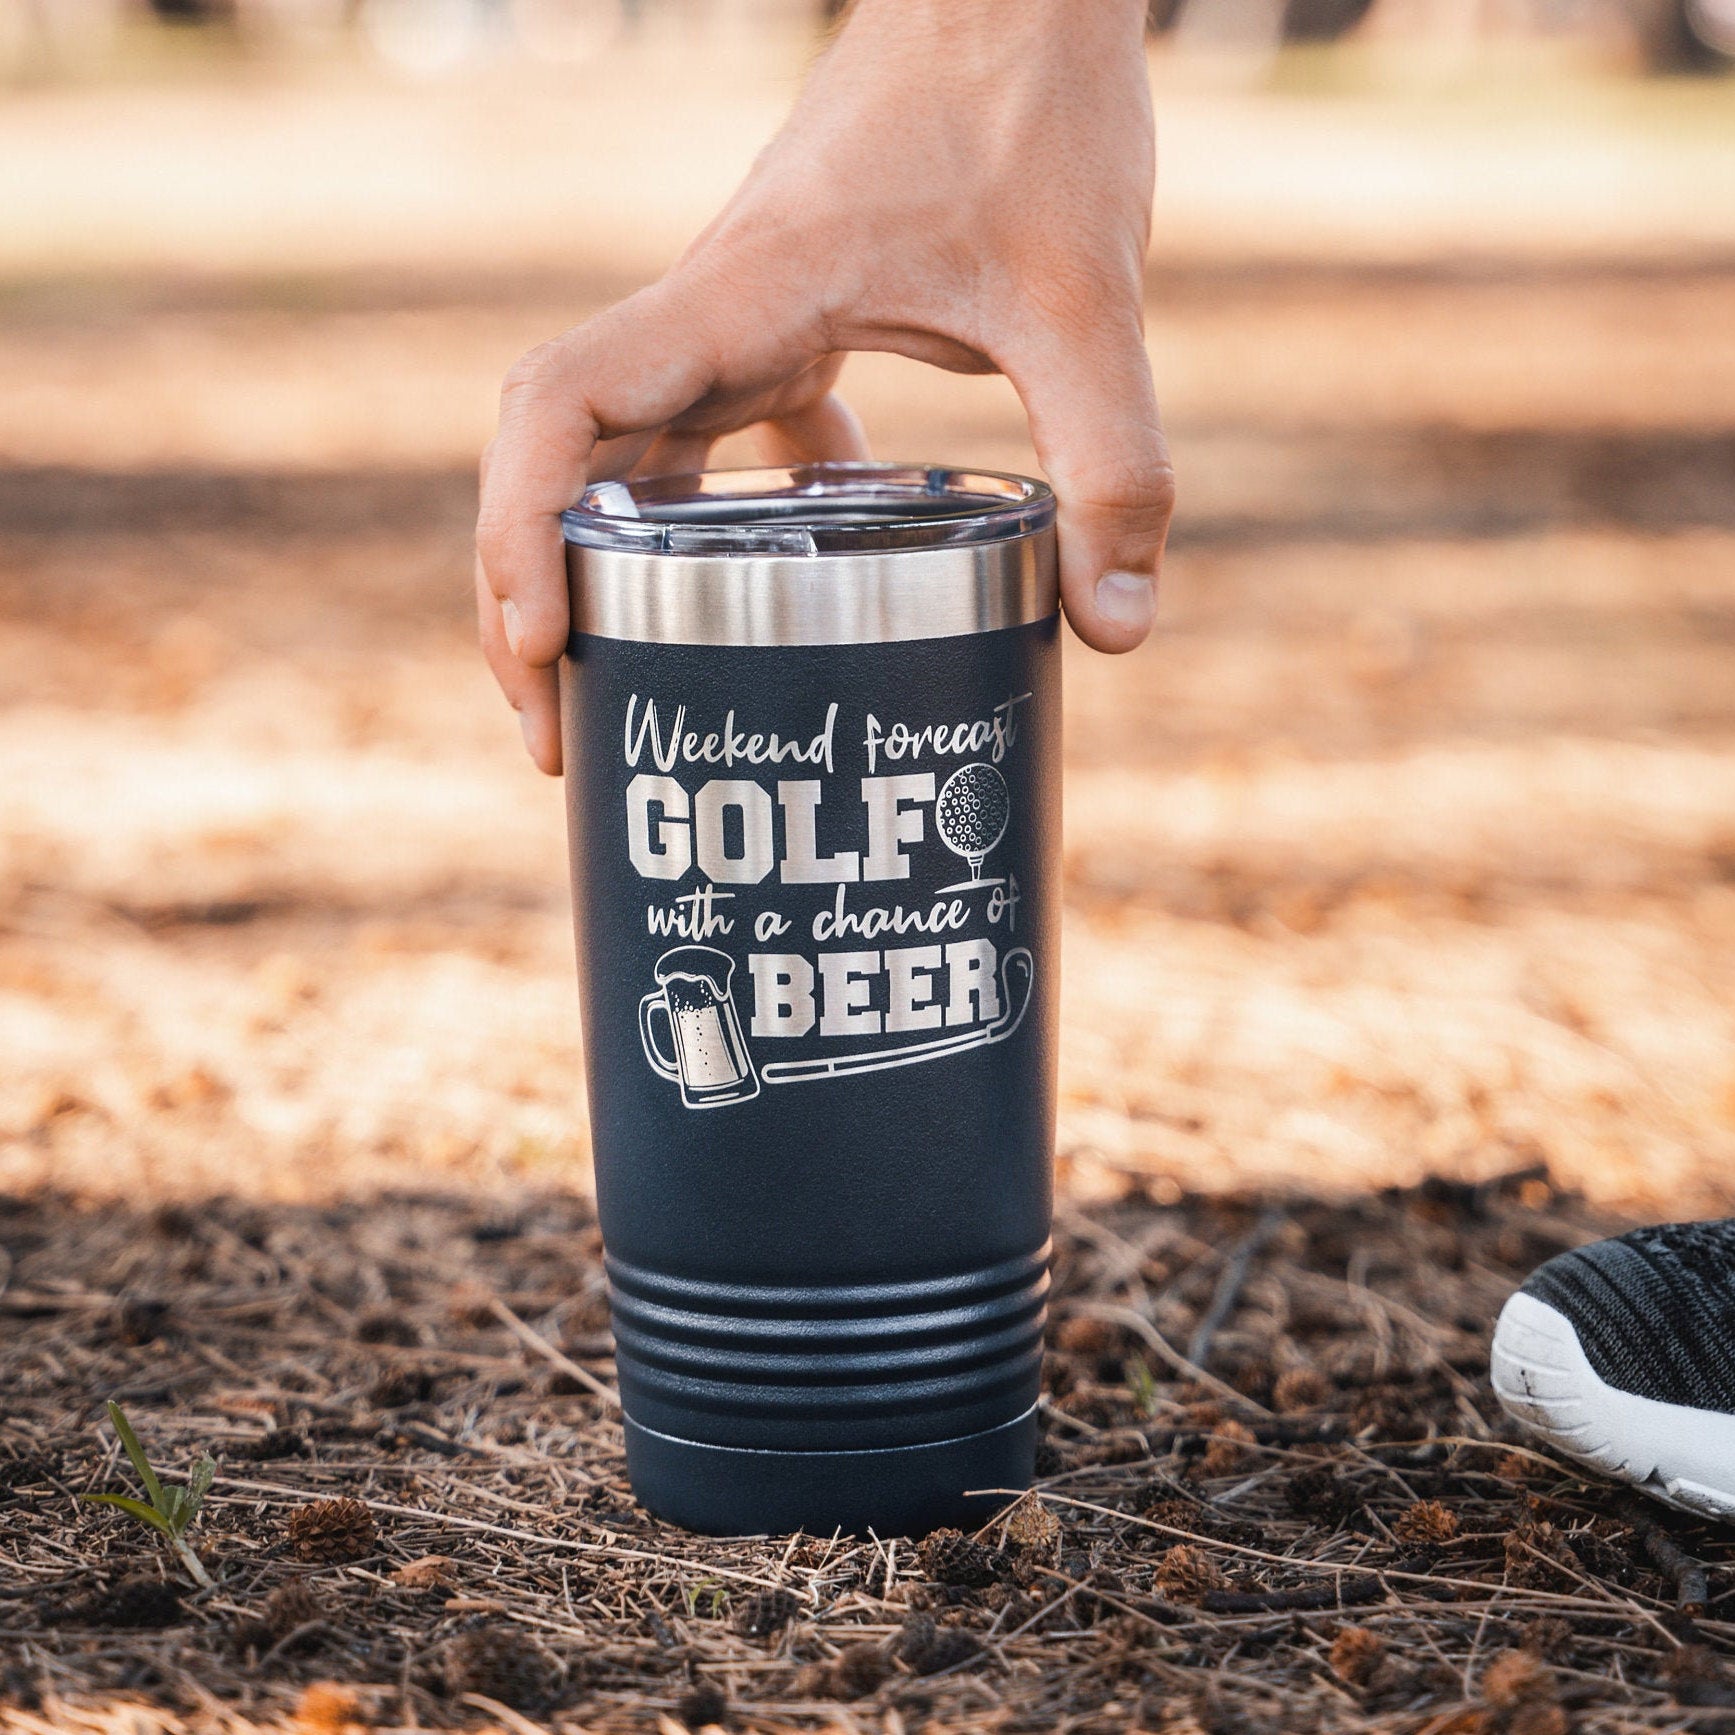 https://3cetching.com/wp-content/uploads/2021/07/weekend-forecast-golf-with-chance-of-beer-engraved-stainless-steel-tumbler-funny-golf-gifts-for-men-funny-golfing-mug-60f75e9a.jpg